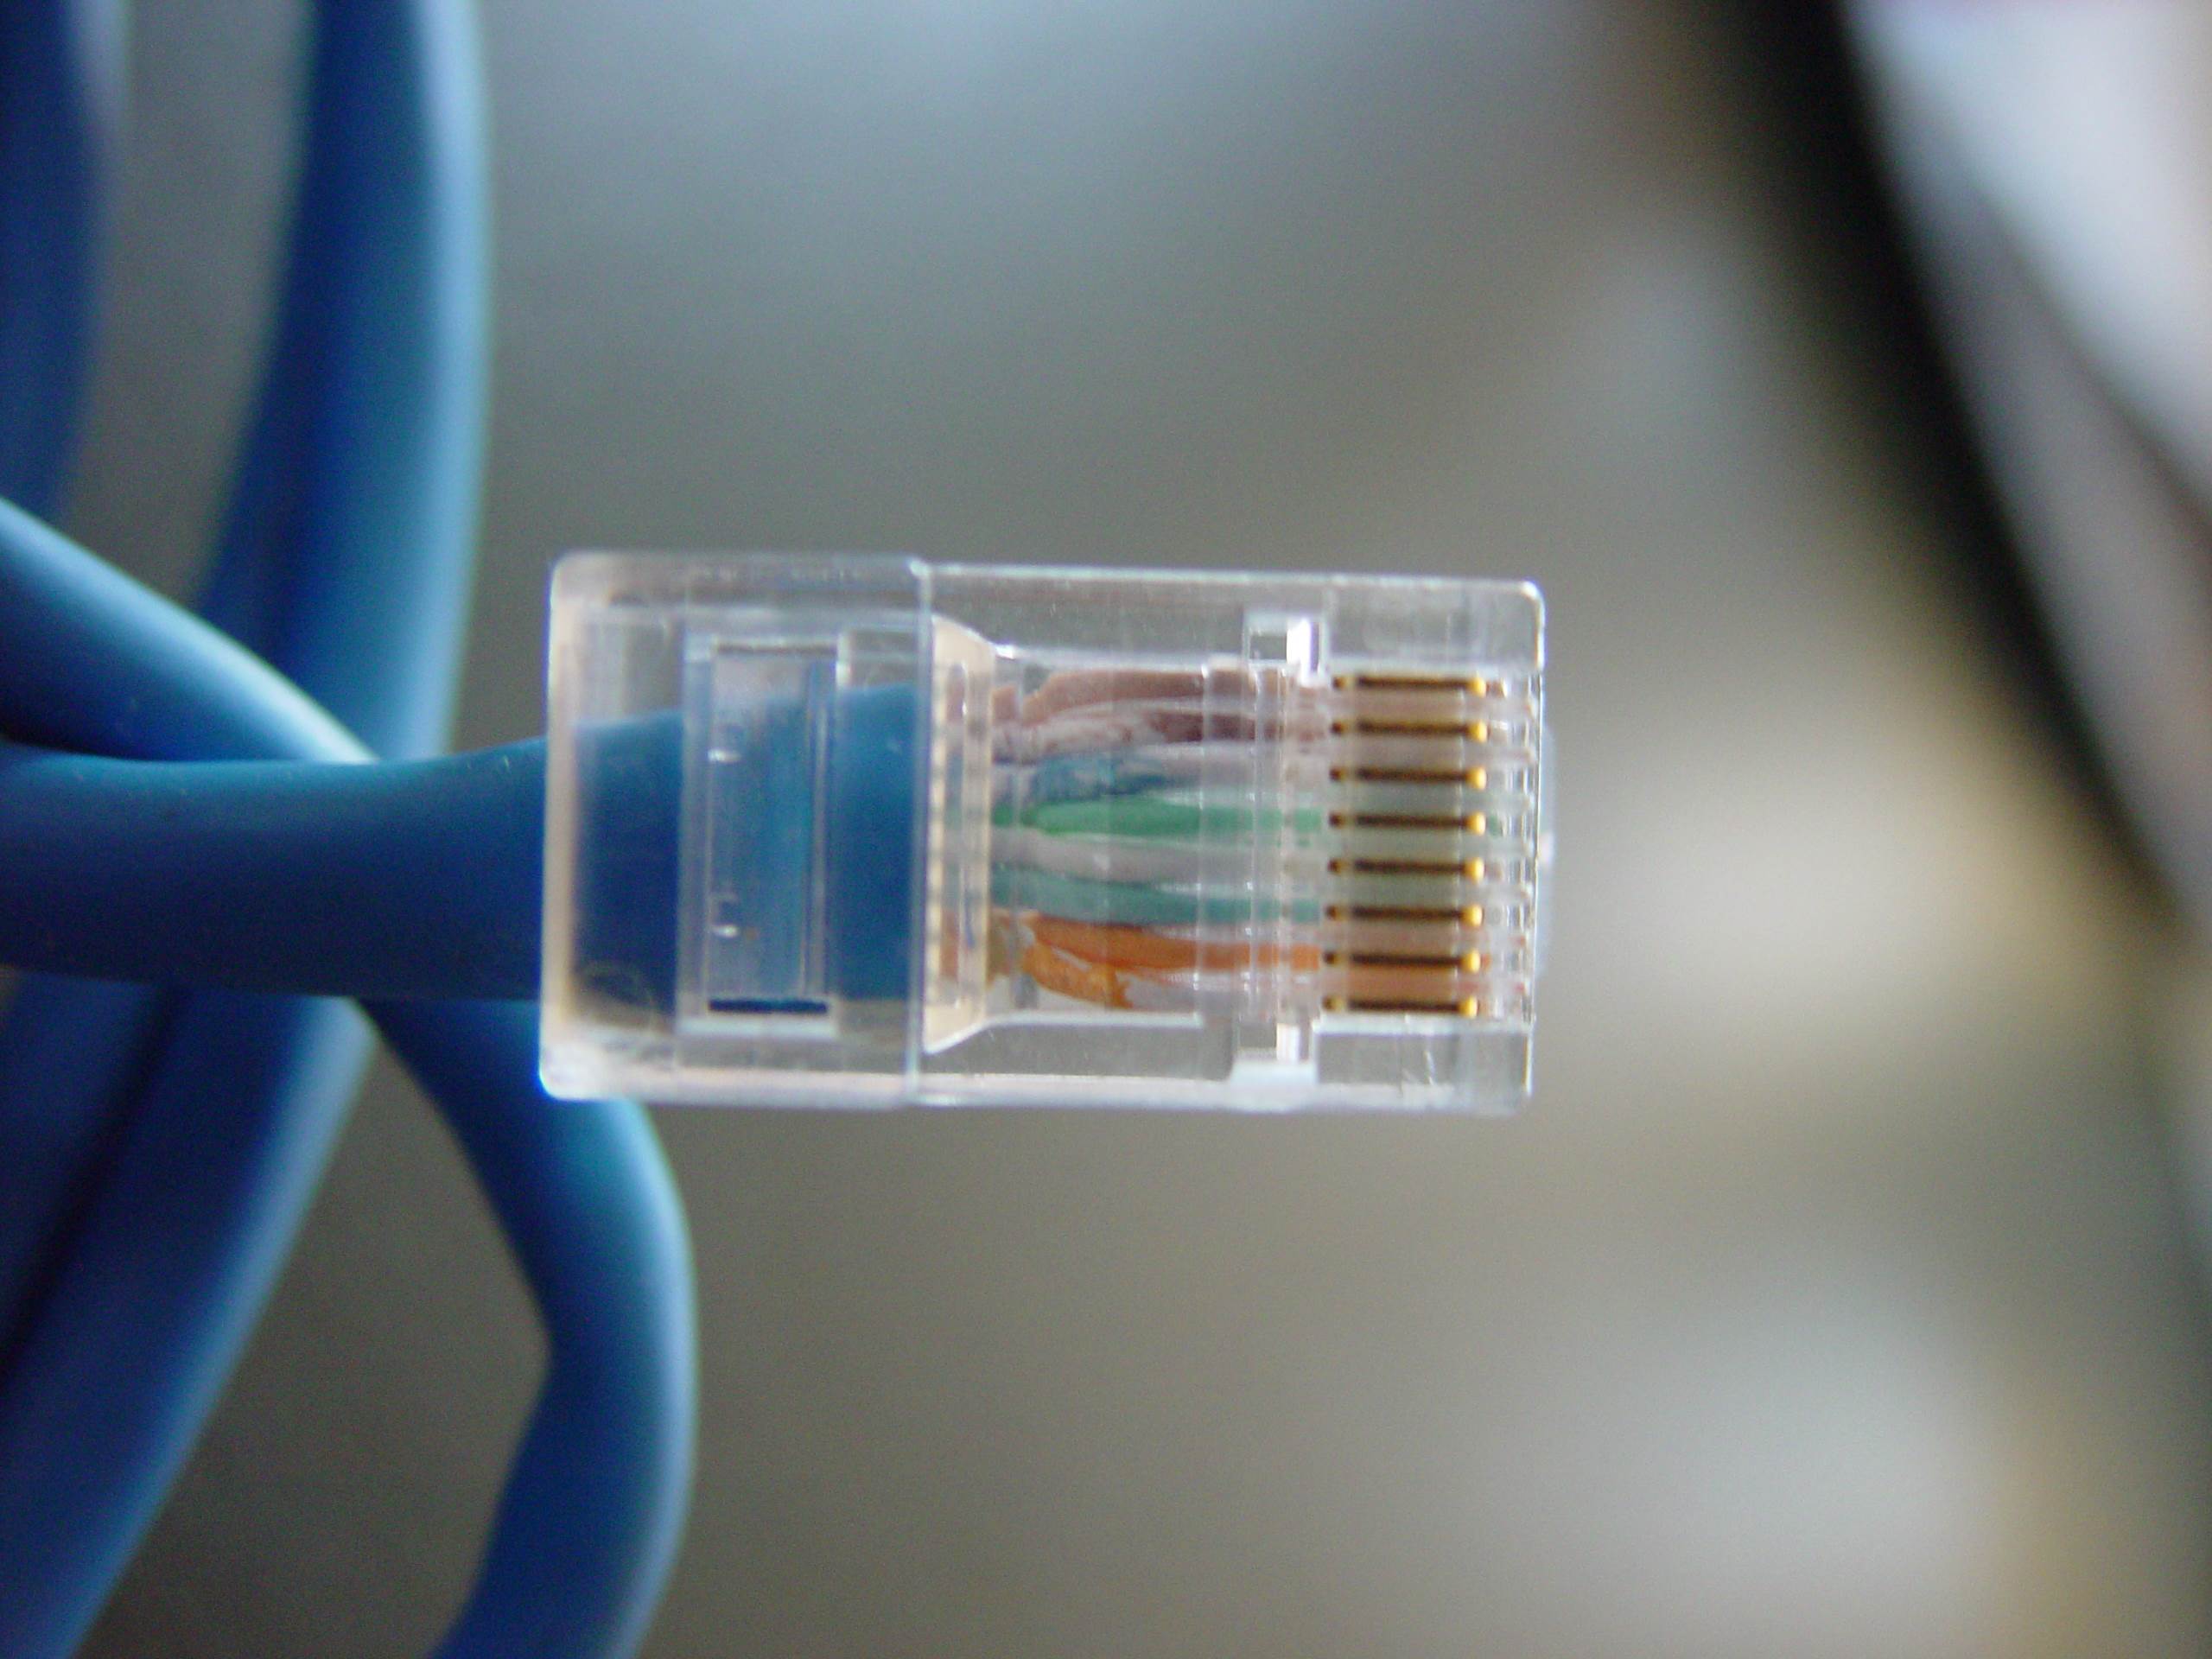 How To Put Connector On Ethernet Cable